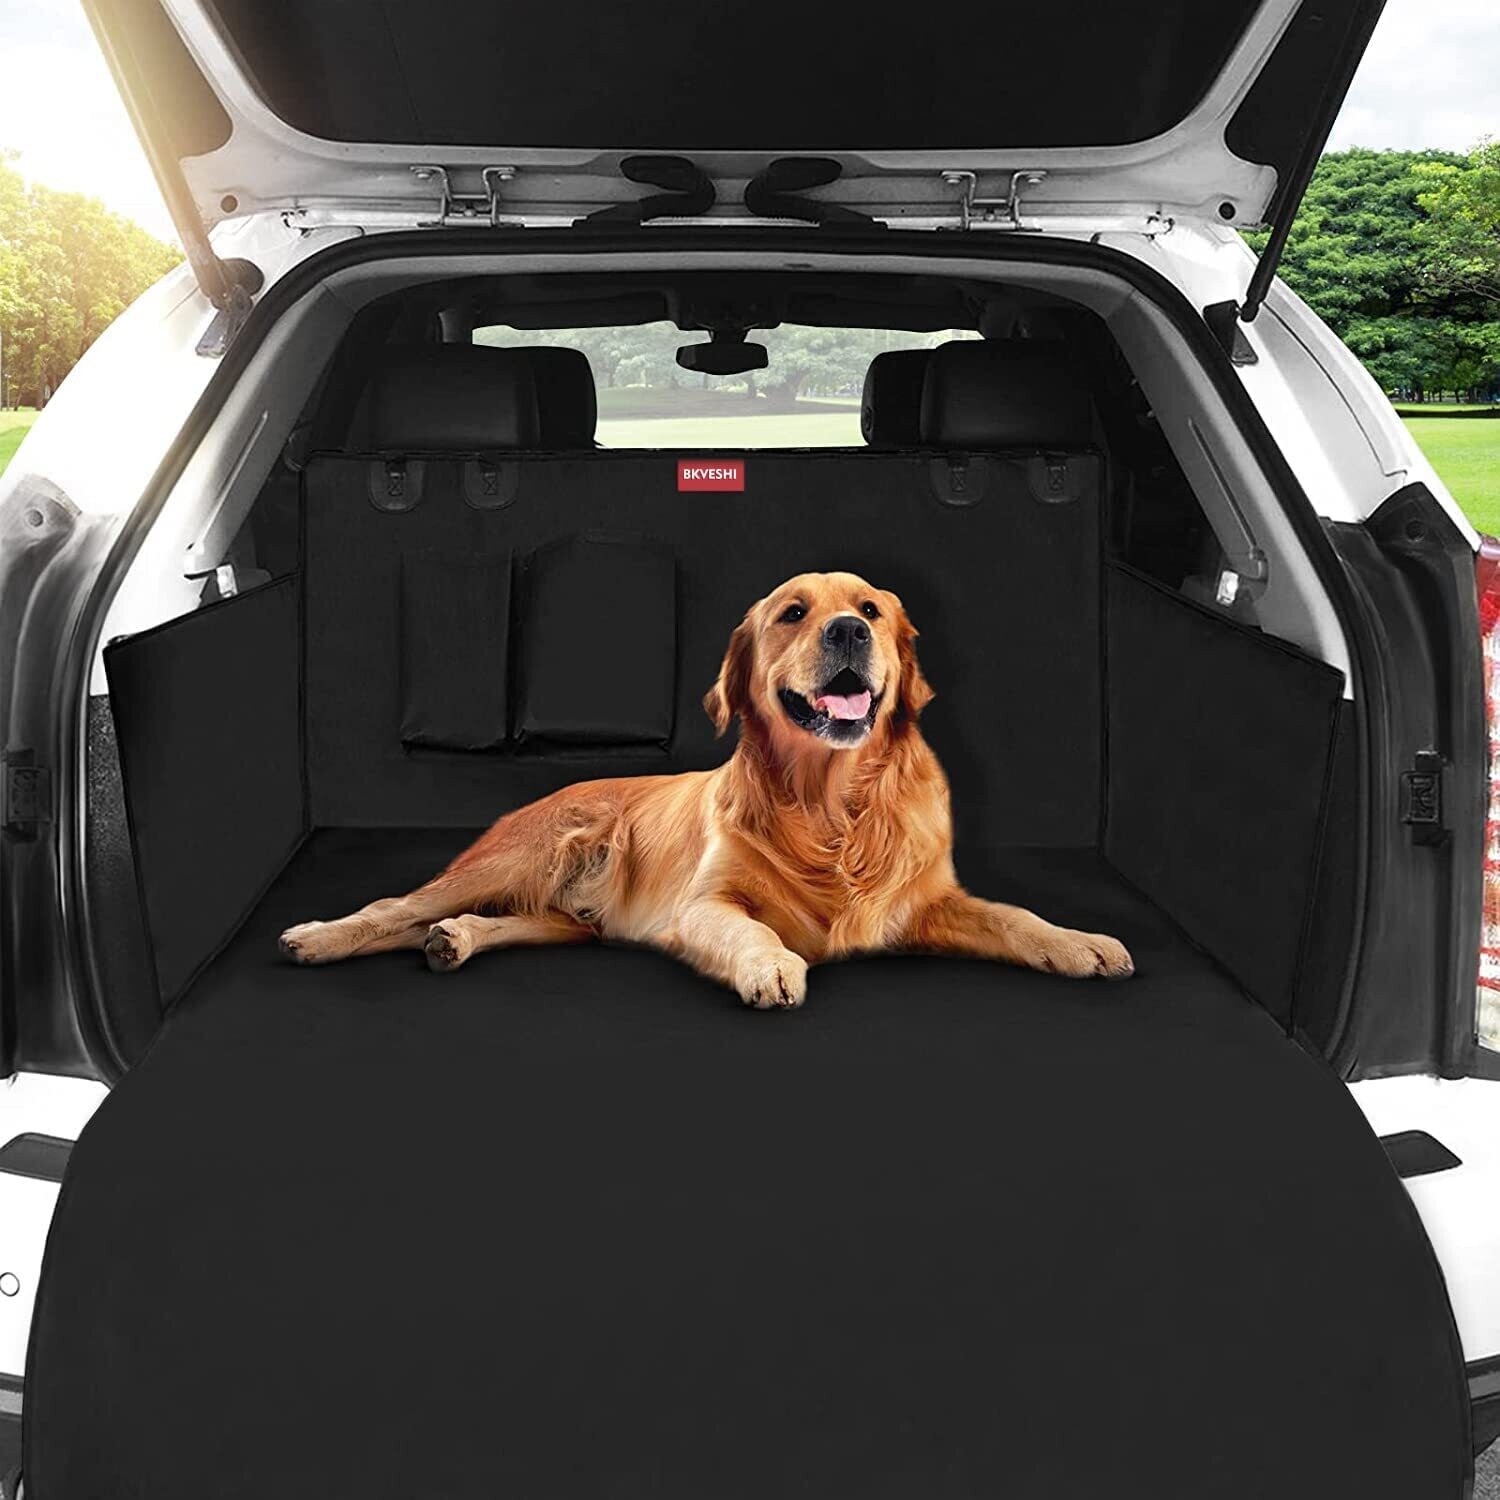 Universal Nonslip Waterproof Pet Dog Back Seat Cover, Durable Washable Cover Mat